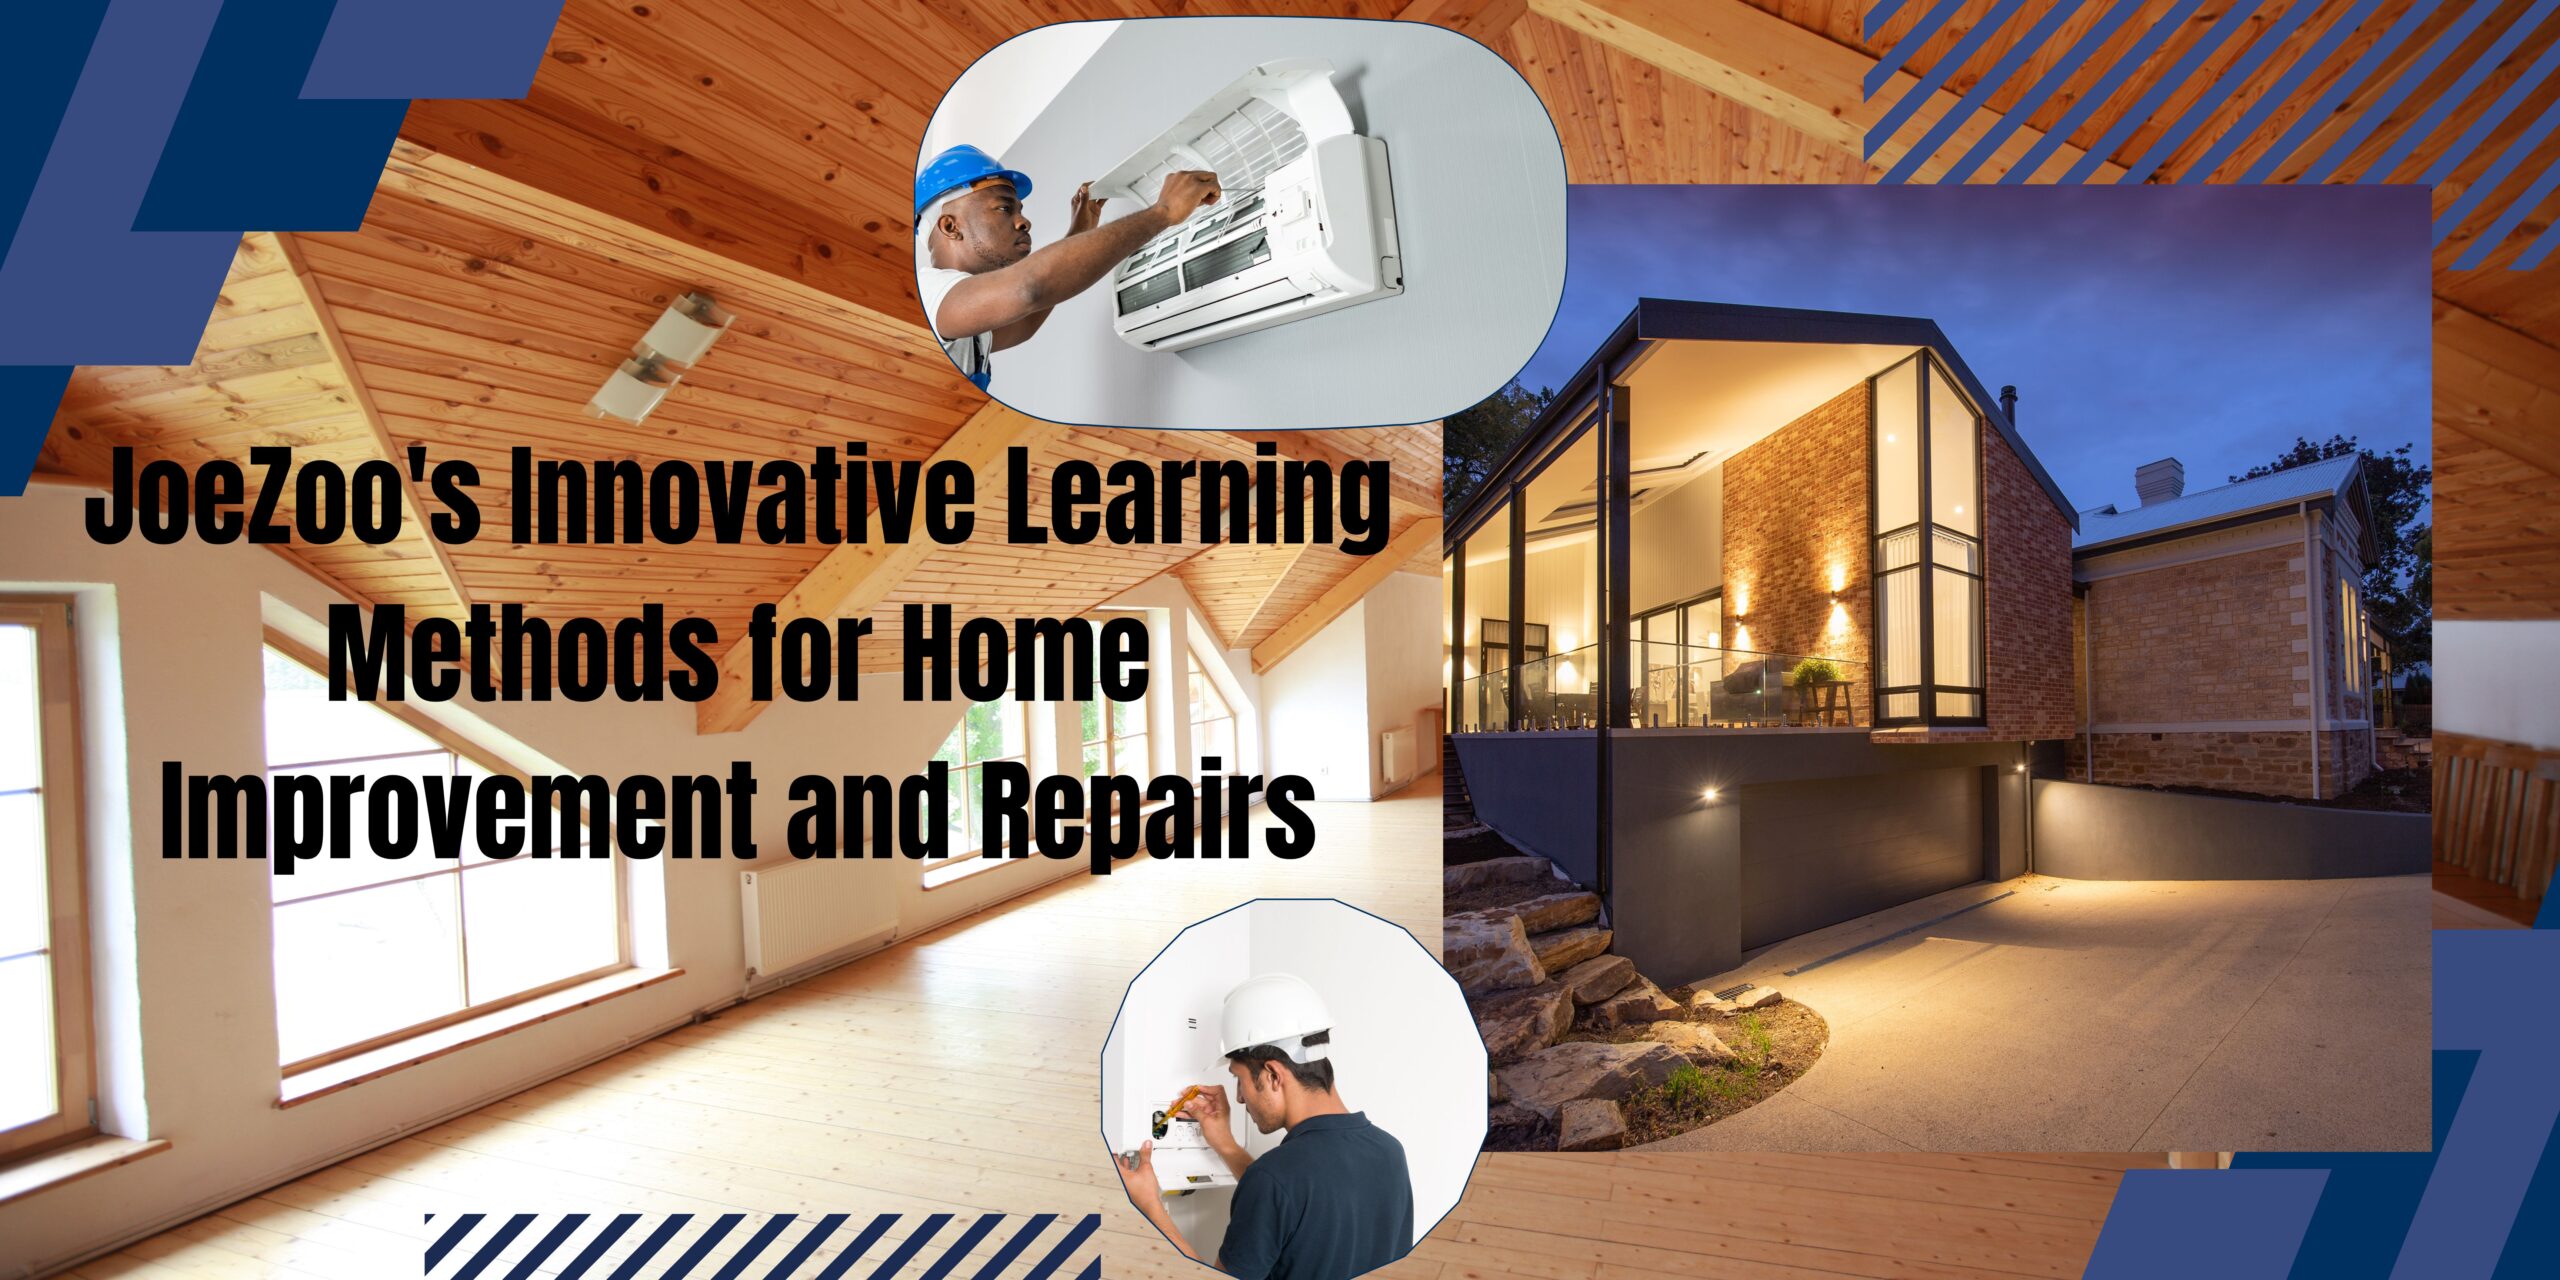 JoeZoo's Innovative Learning Methods for Home Improvement and Repairs